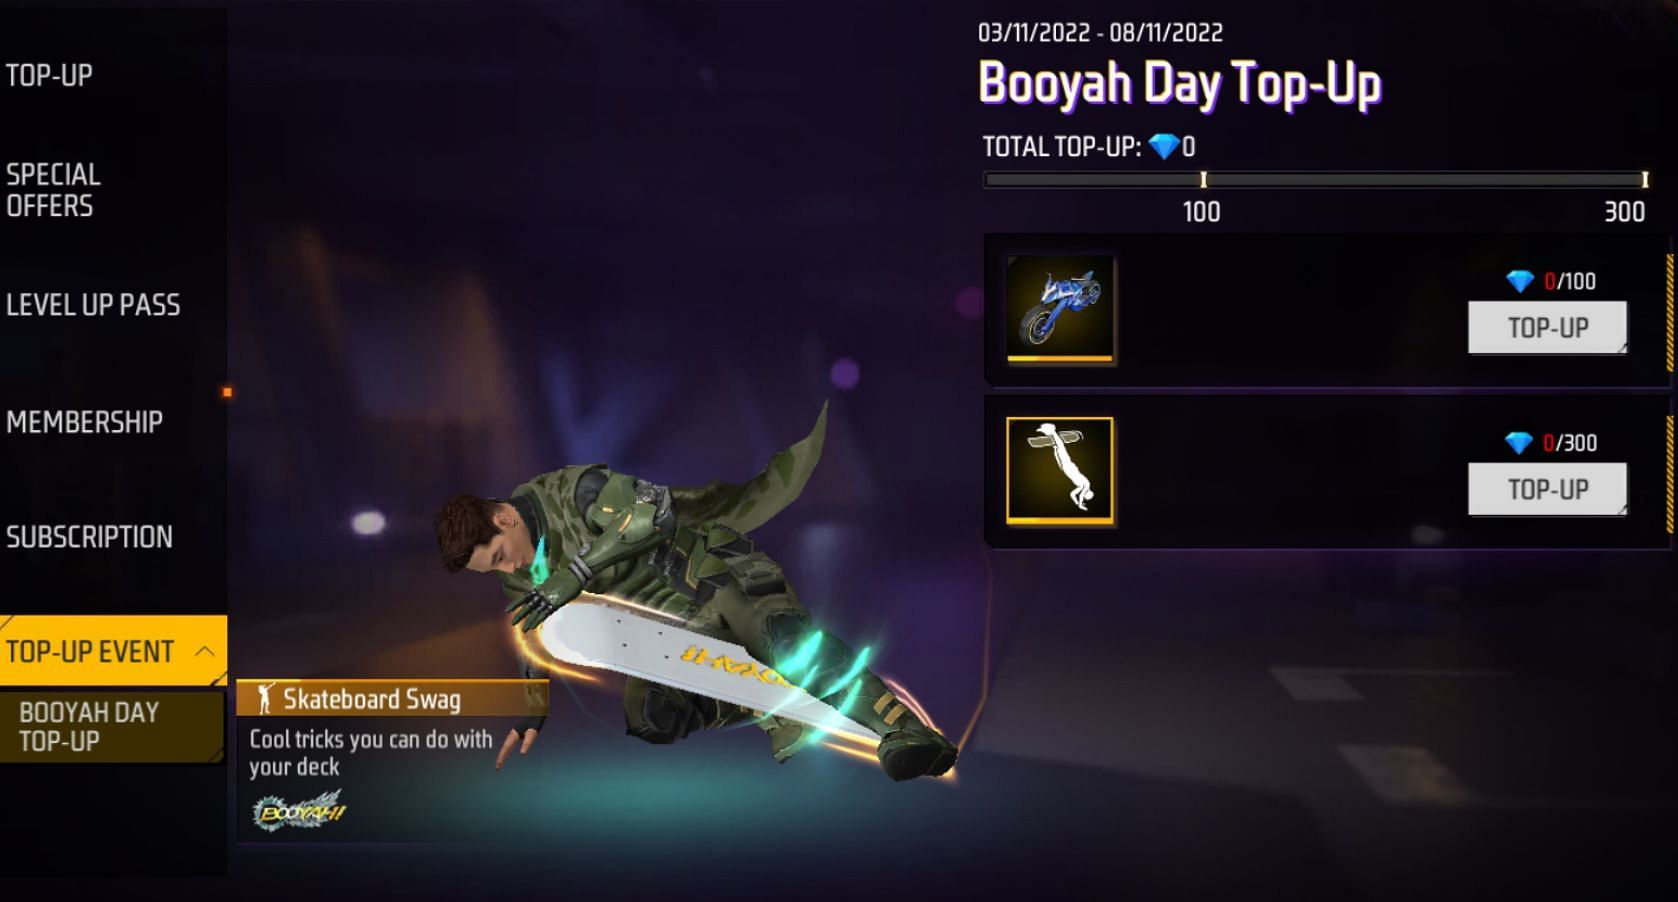 Rewards in the Booyah Day Top-Up event (Image via Garena)